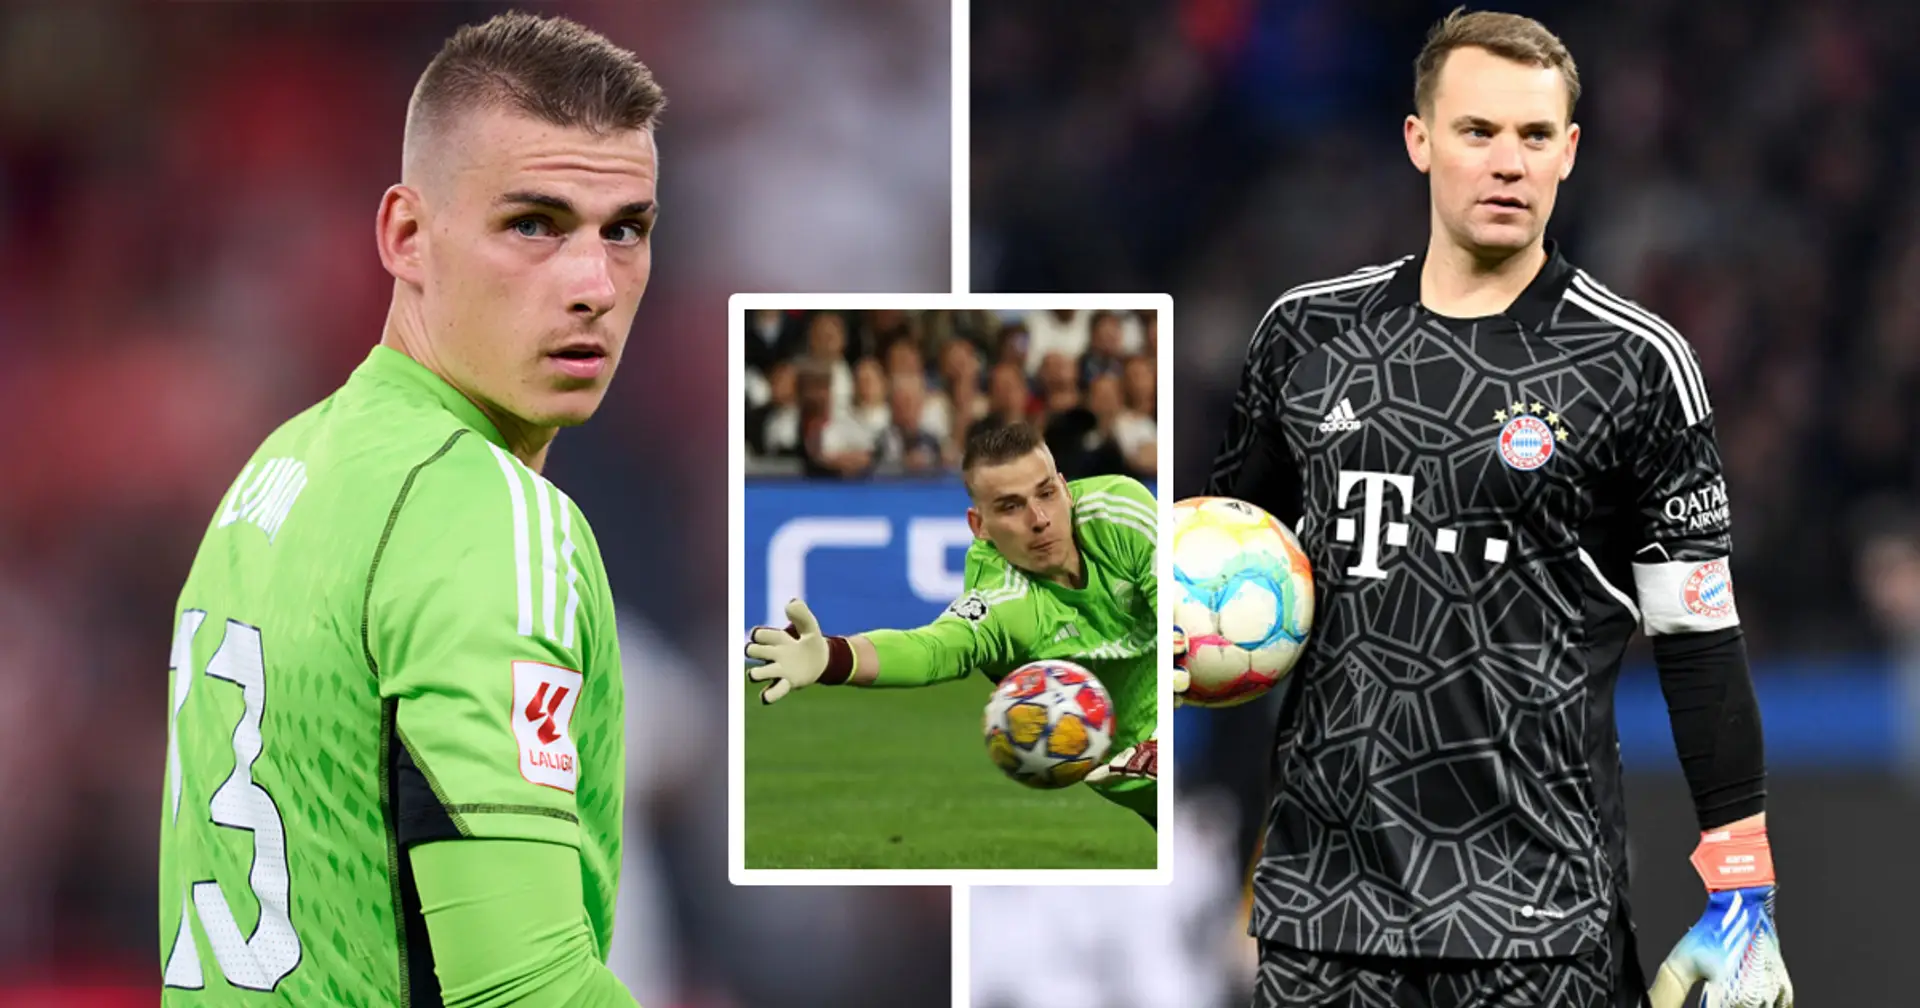 Bayern Munich are interested in Real Madrid goalkeeper Andrey Lunin